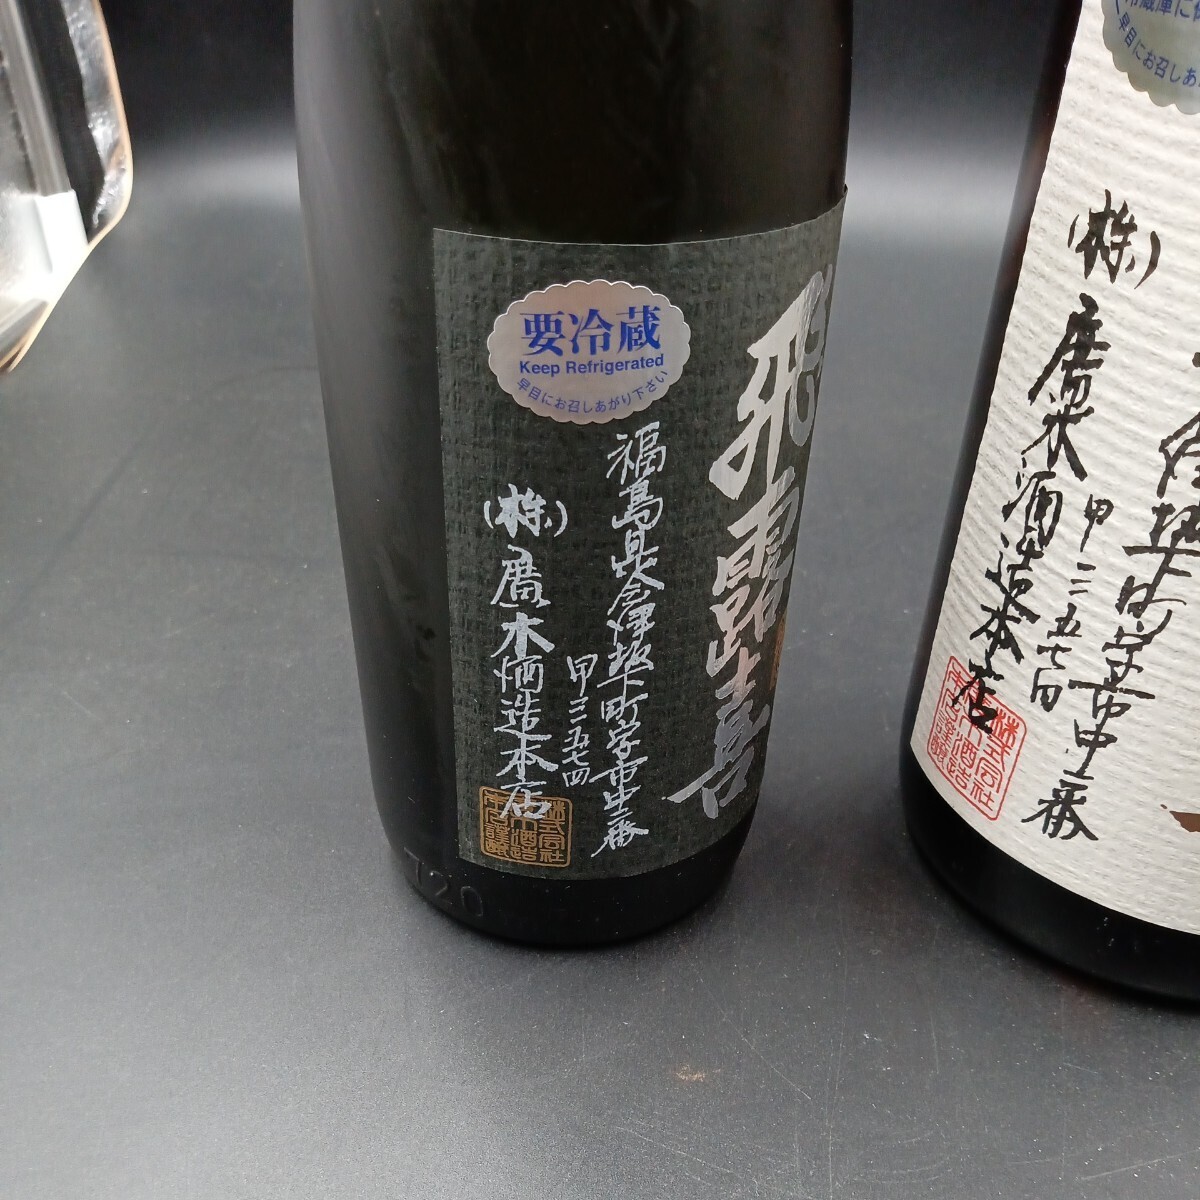 ... special junmai sake 1800/ junmai sake ginjo 720 2 pcs set commodity explanation according transactions is impossible person is, successful bidder circumstances . cancel does. summarize transactions un- possible.